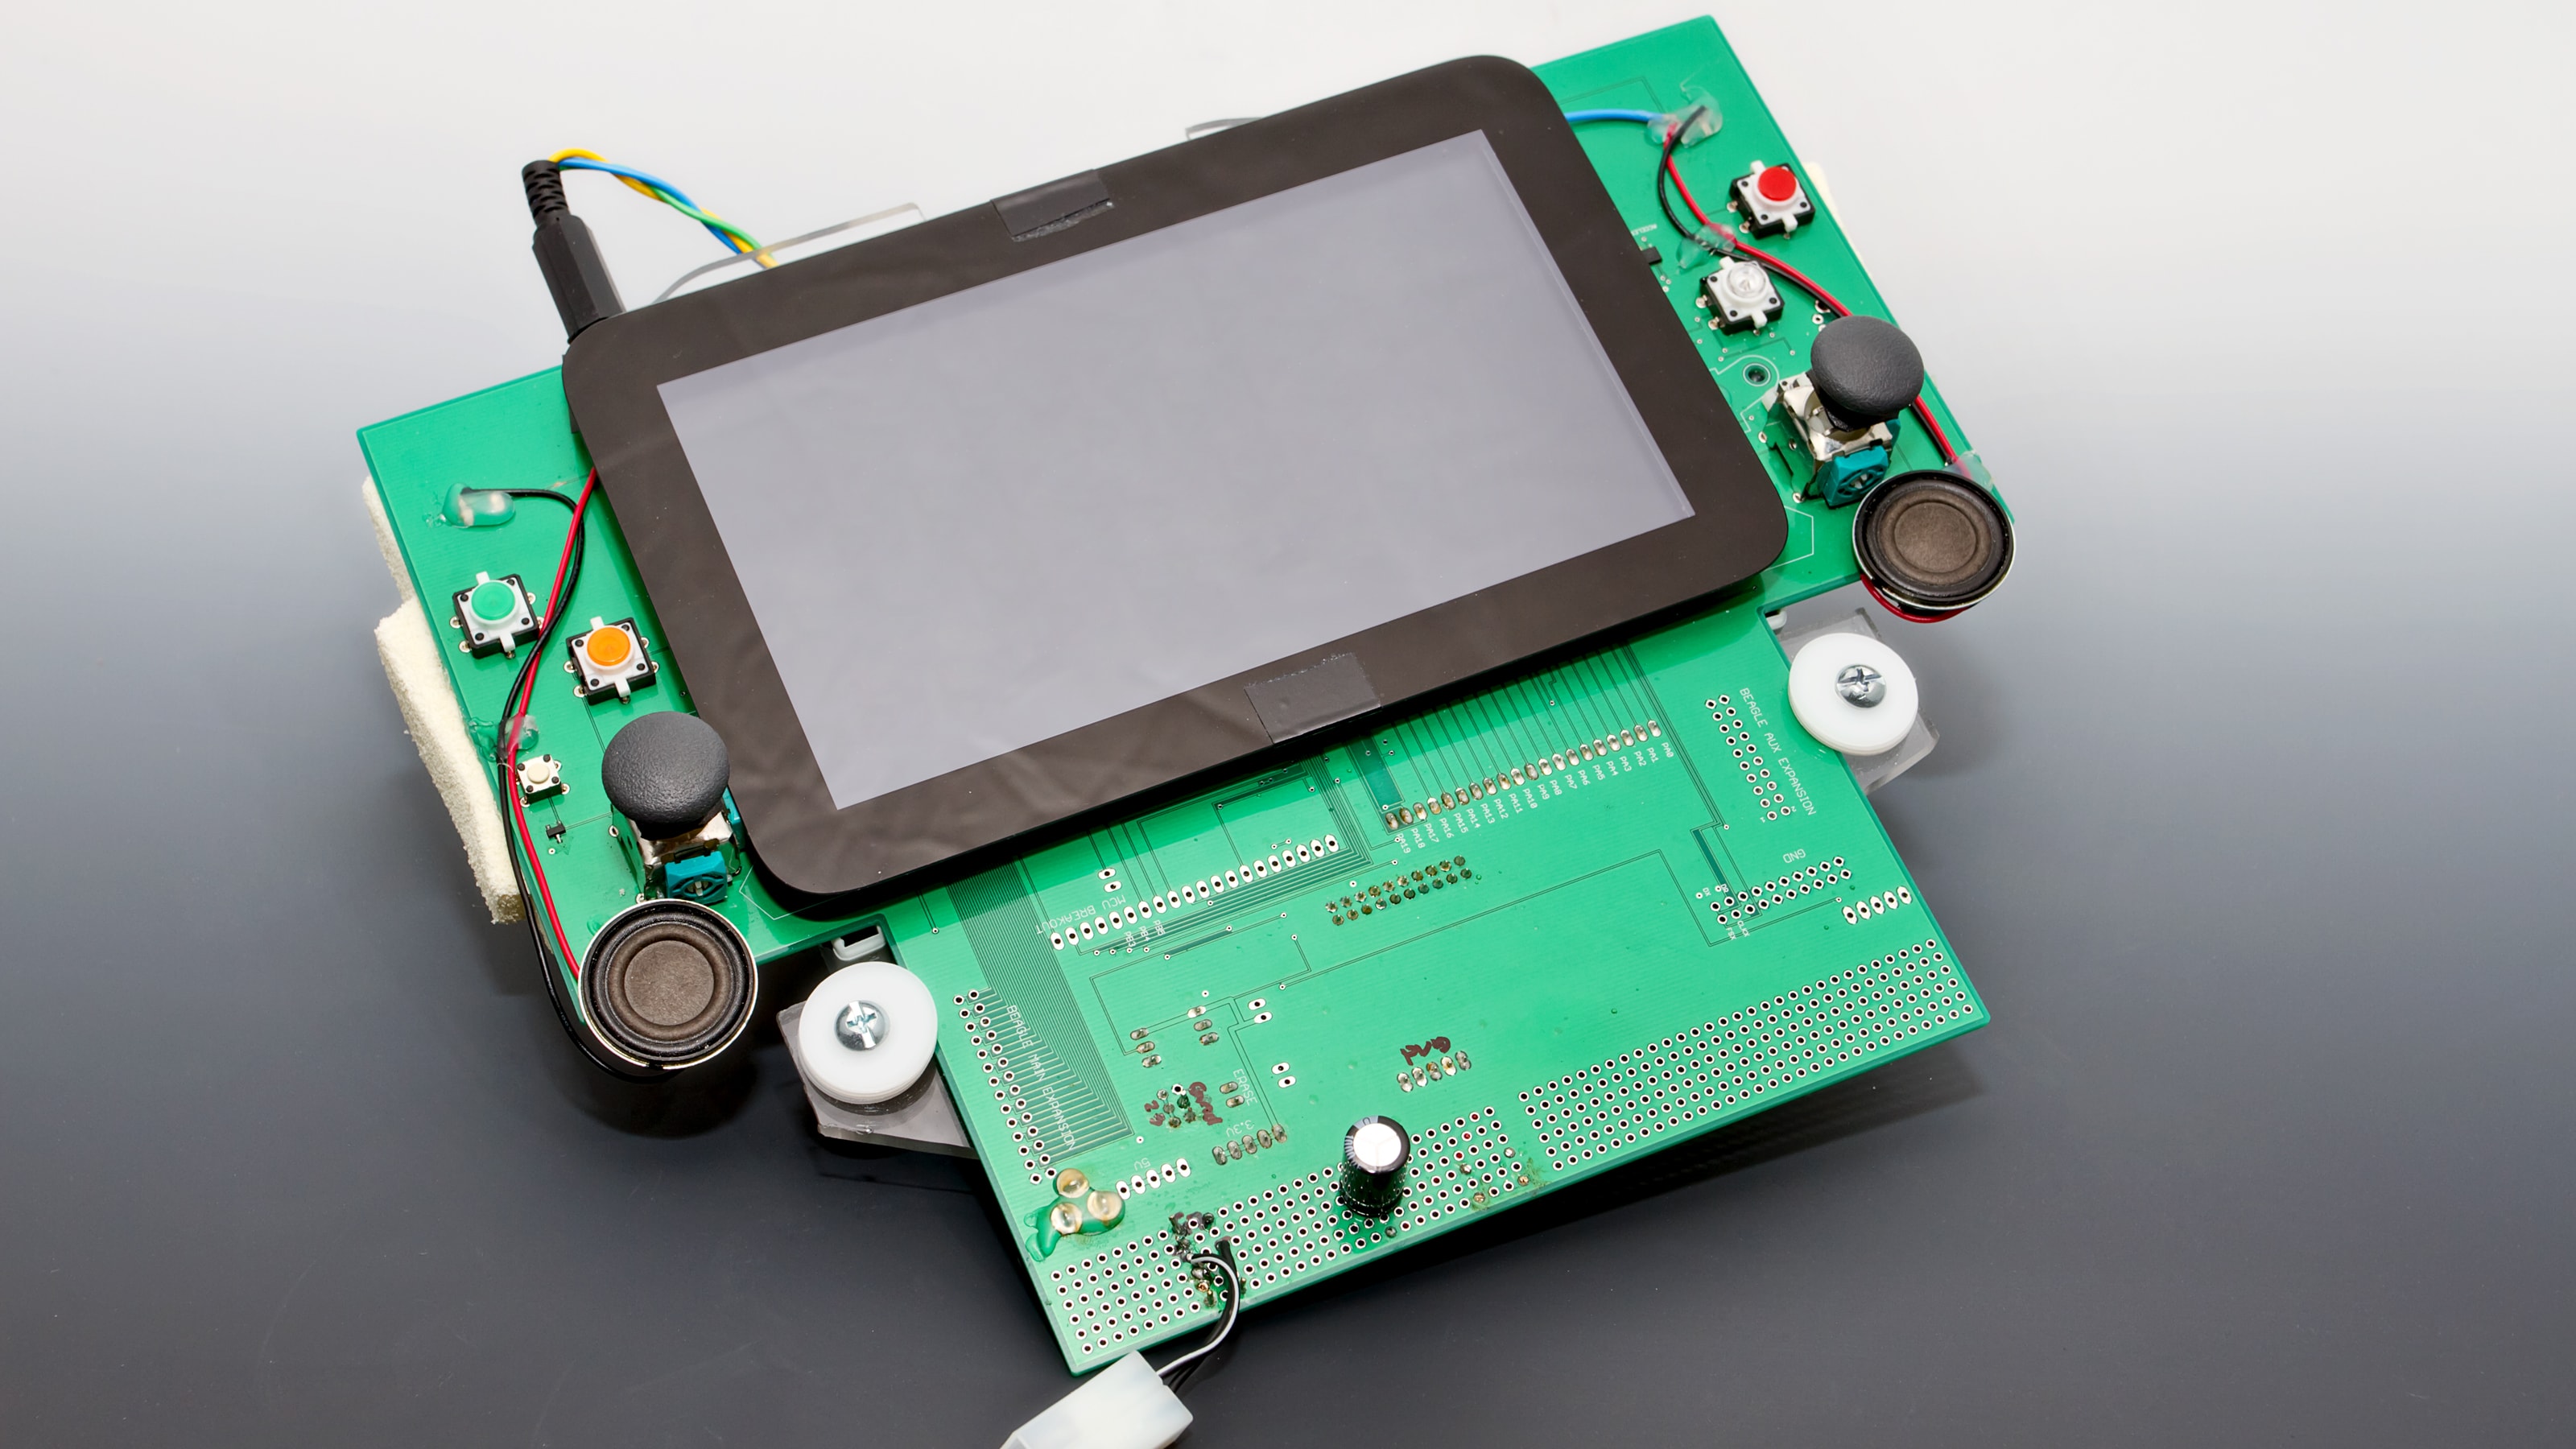 A screen mounted to a green circuit board with two control sticks.